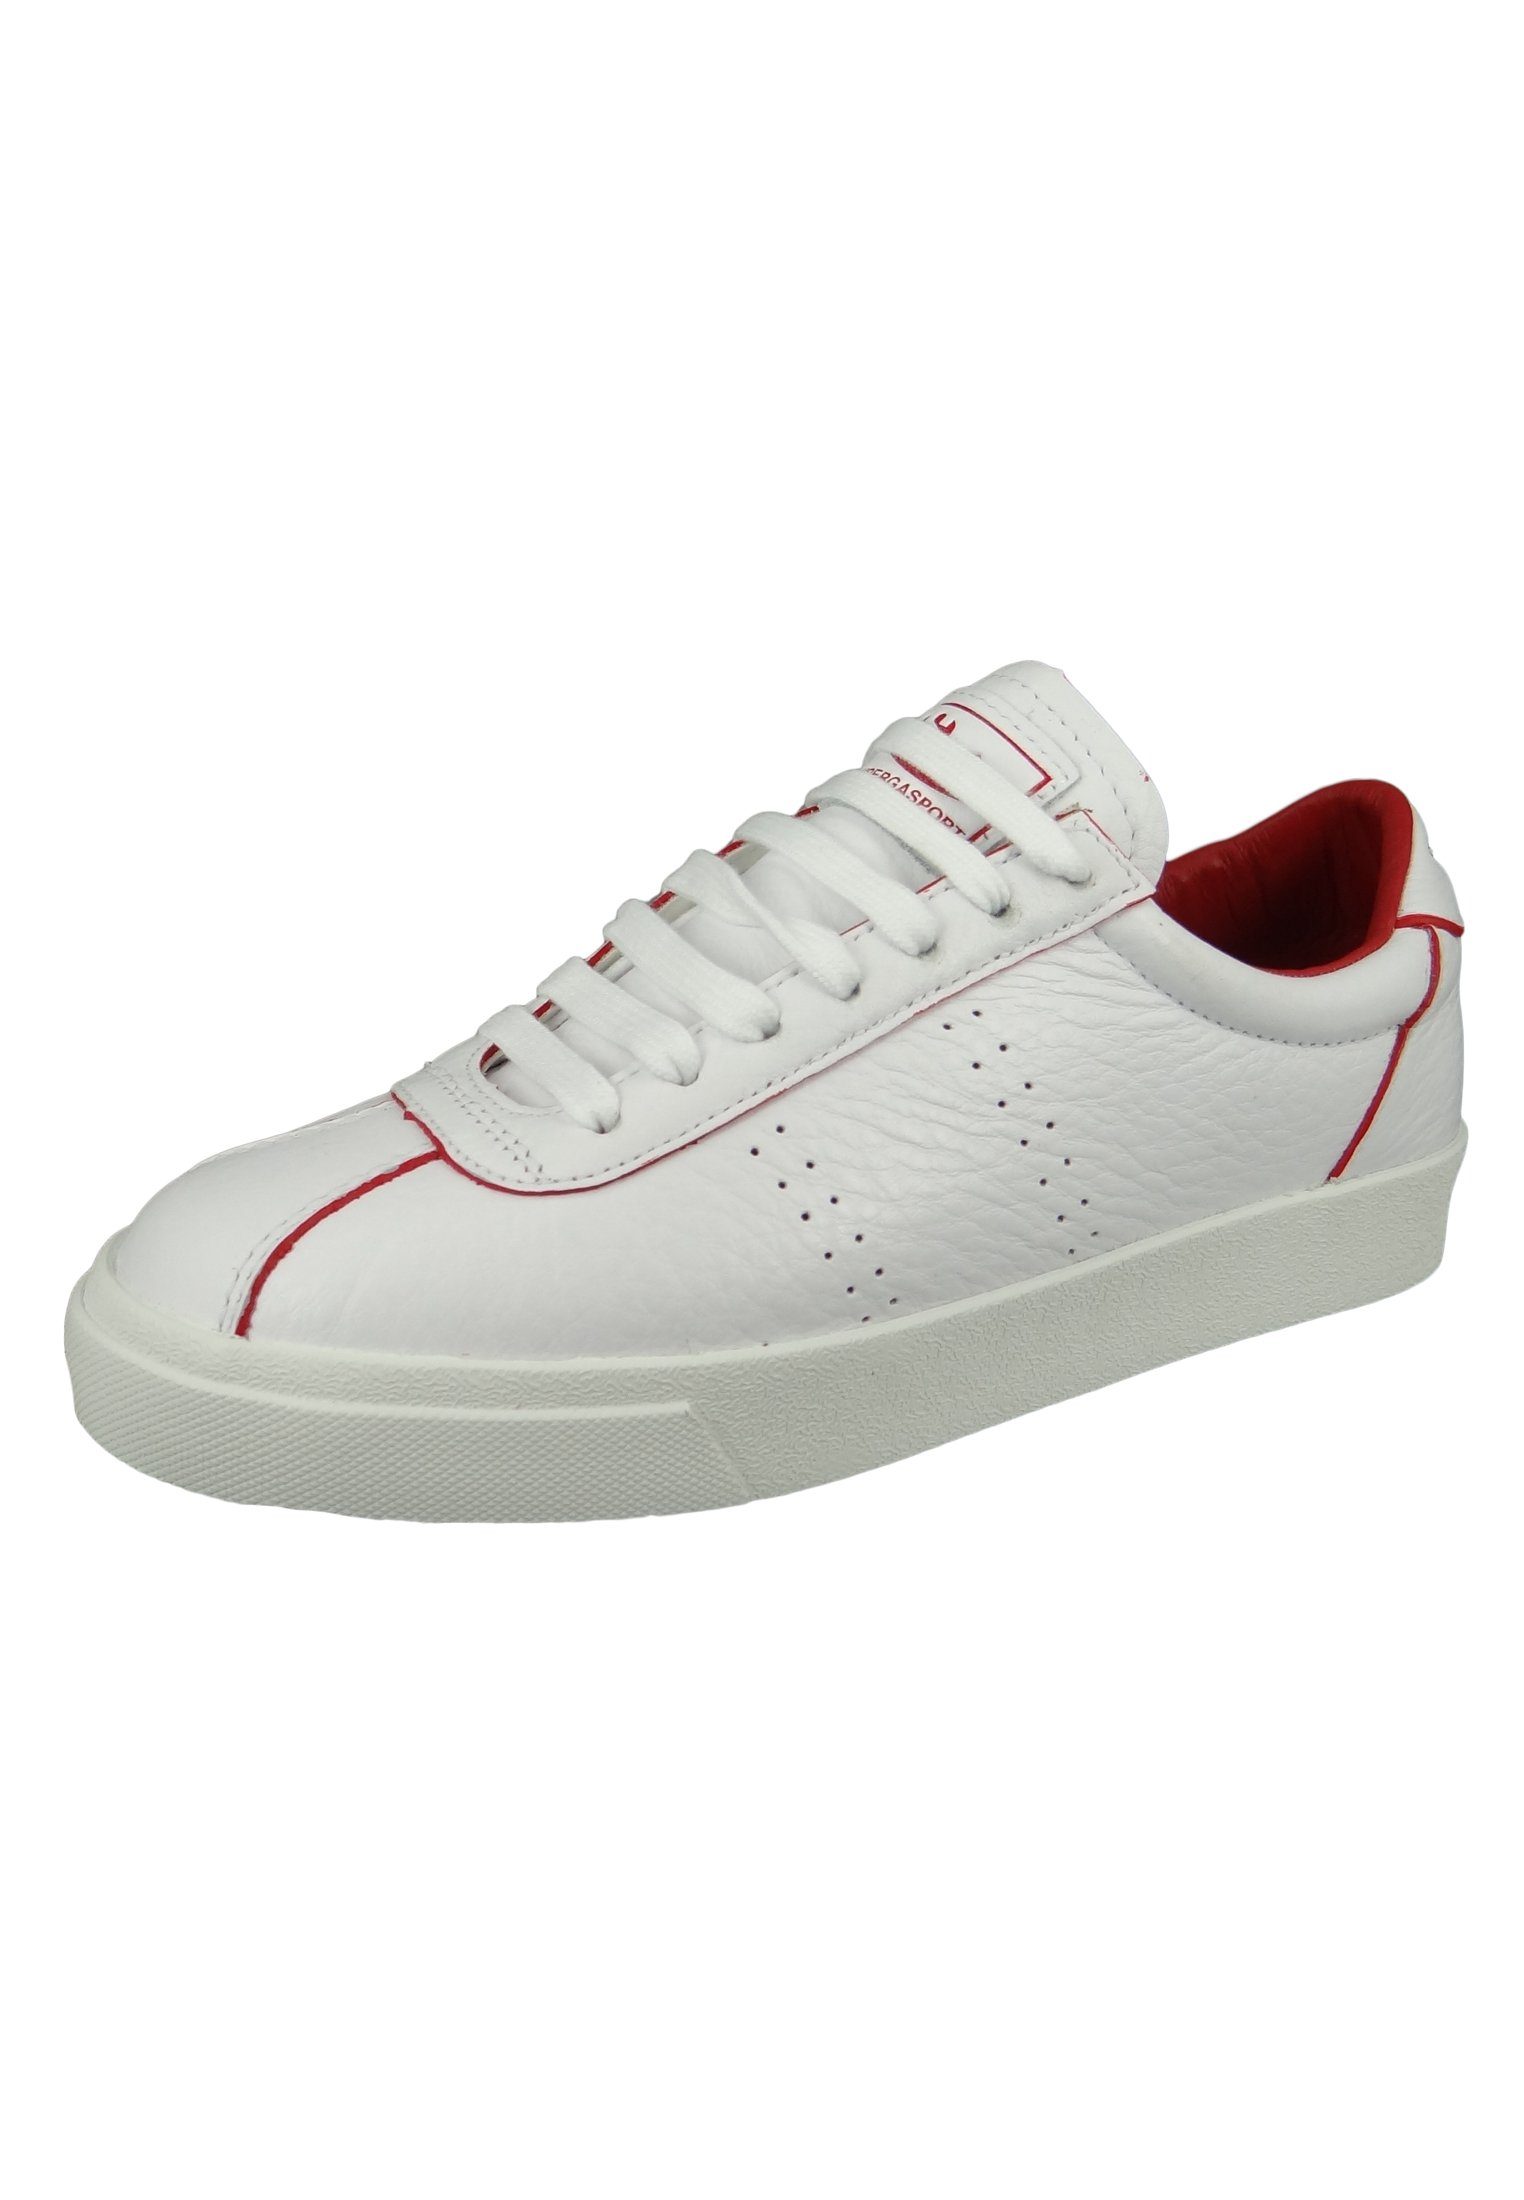 Superga S111WRW Sneaker S Club Comfleau red White 2869 Flame Painted A1Z